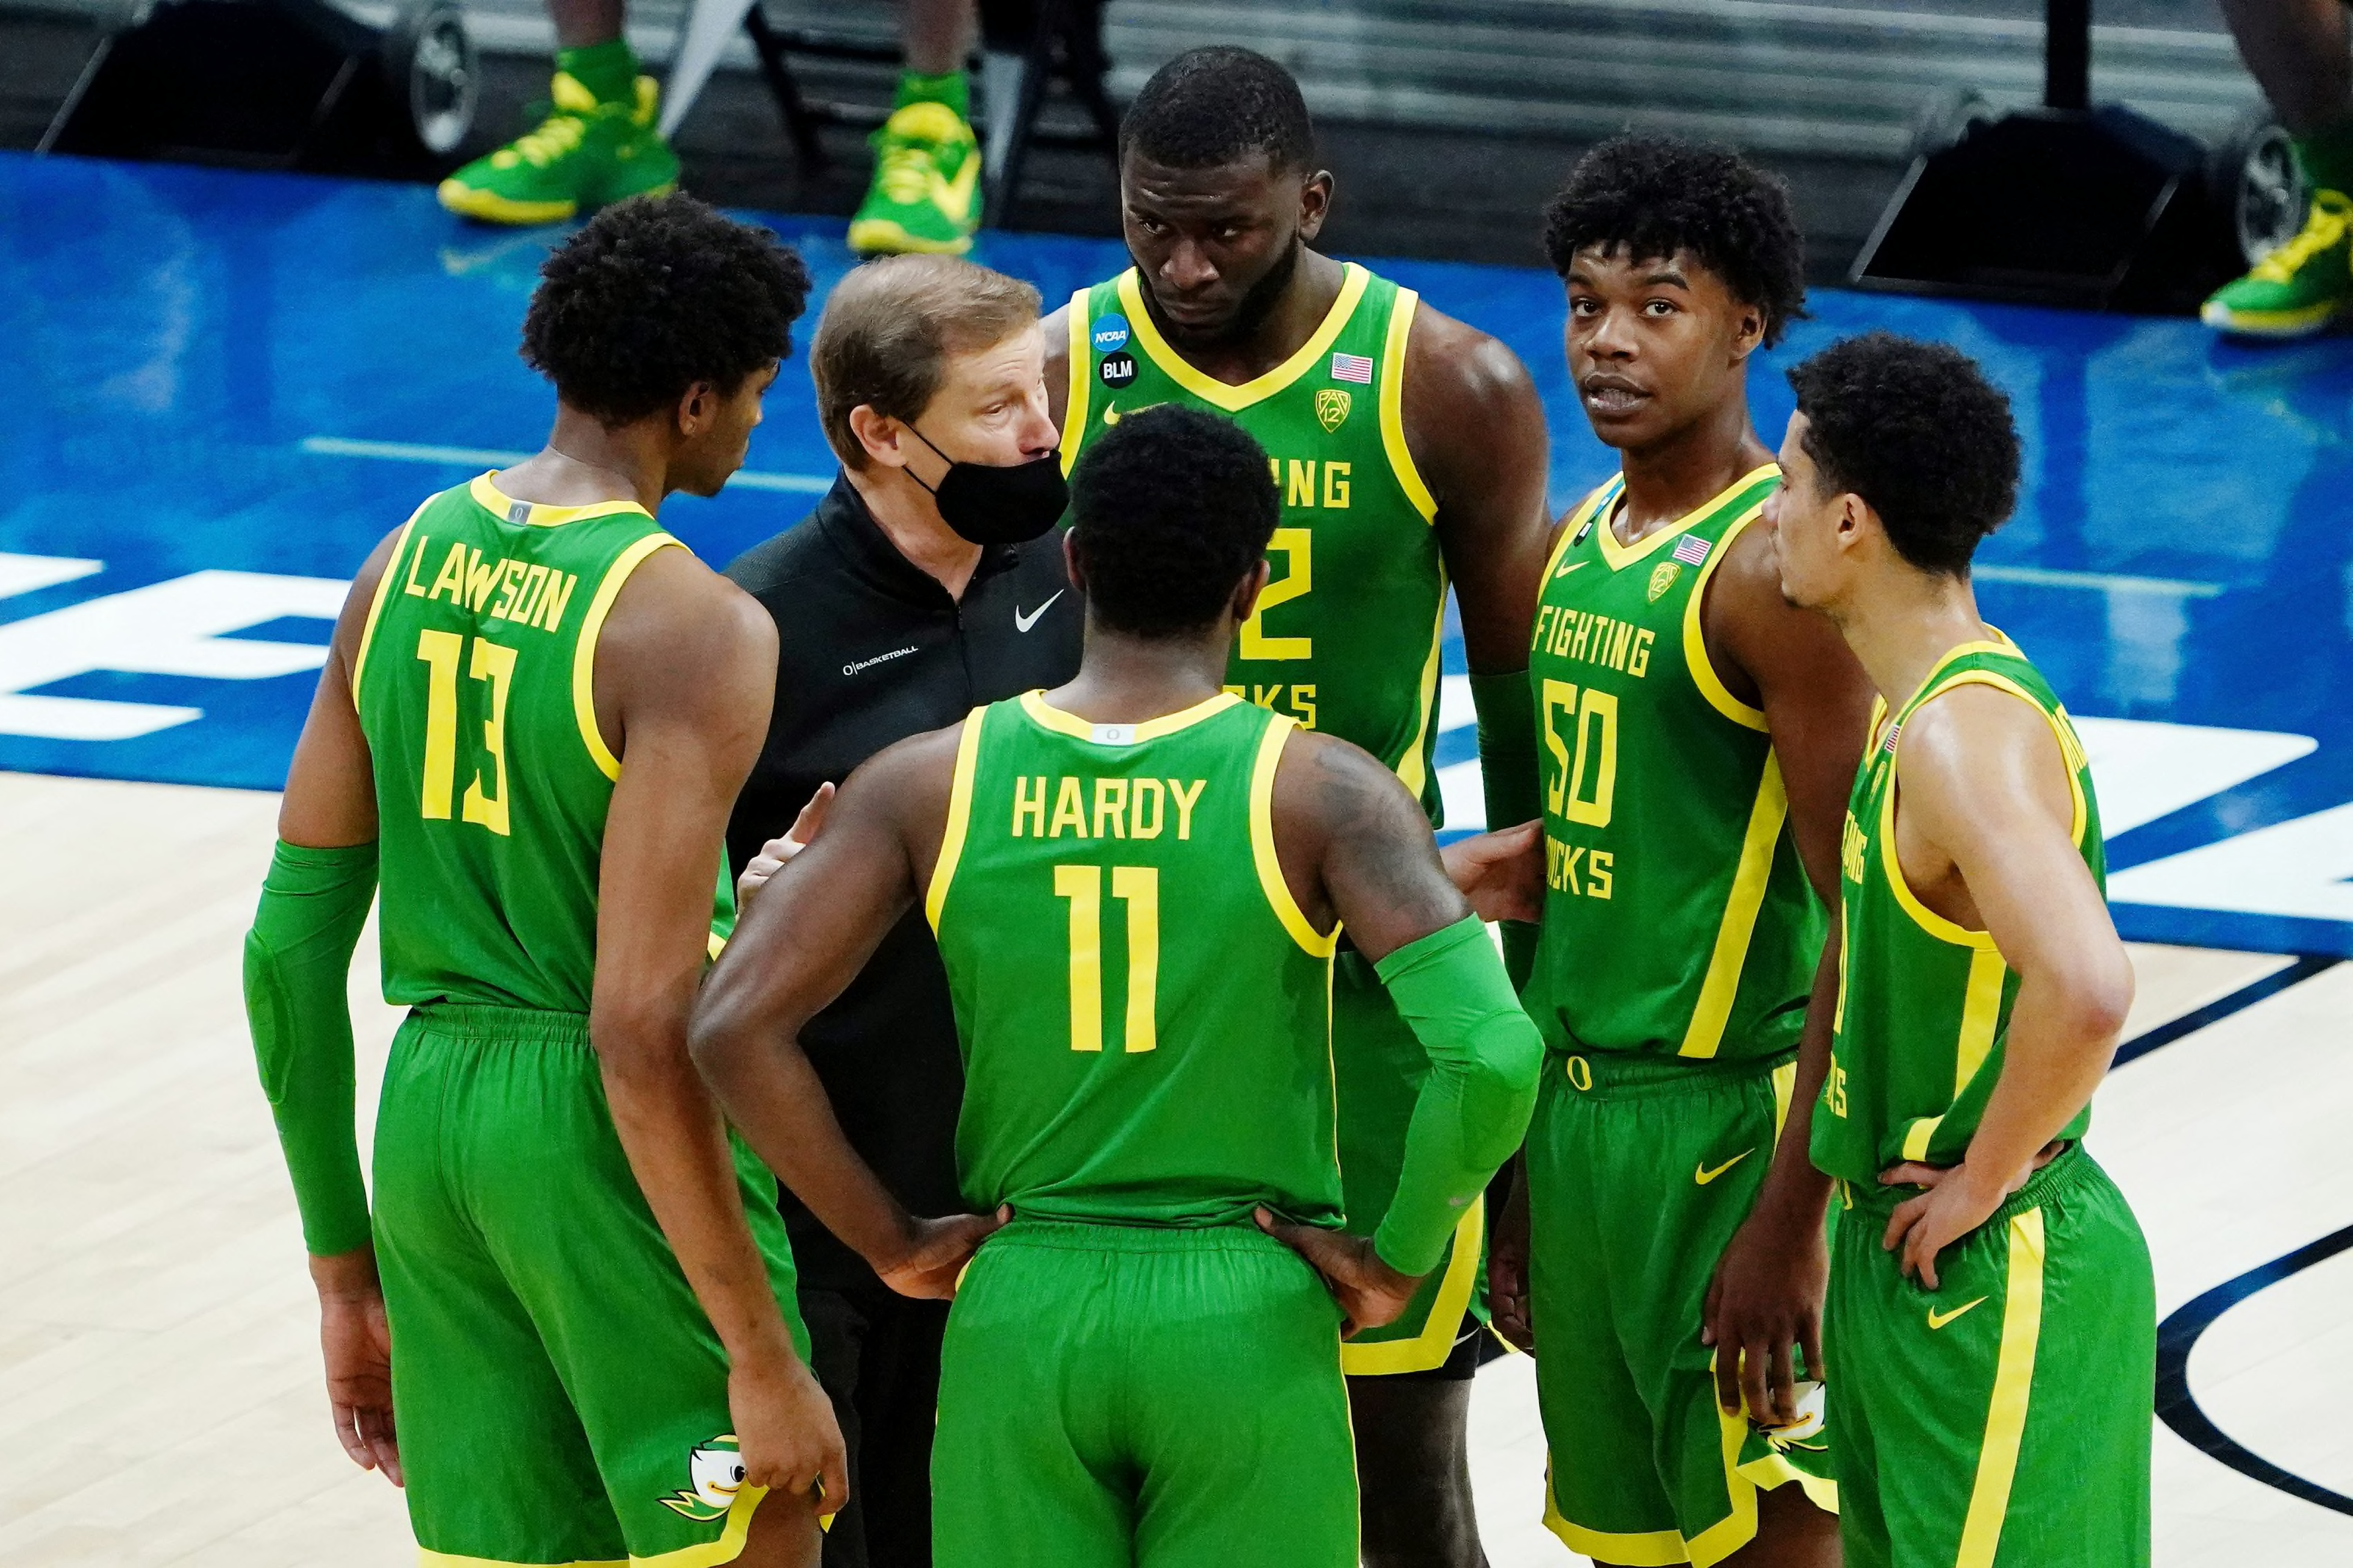 Oregon Basketball Projected starting lineup and depth chart for 202122